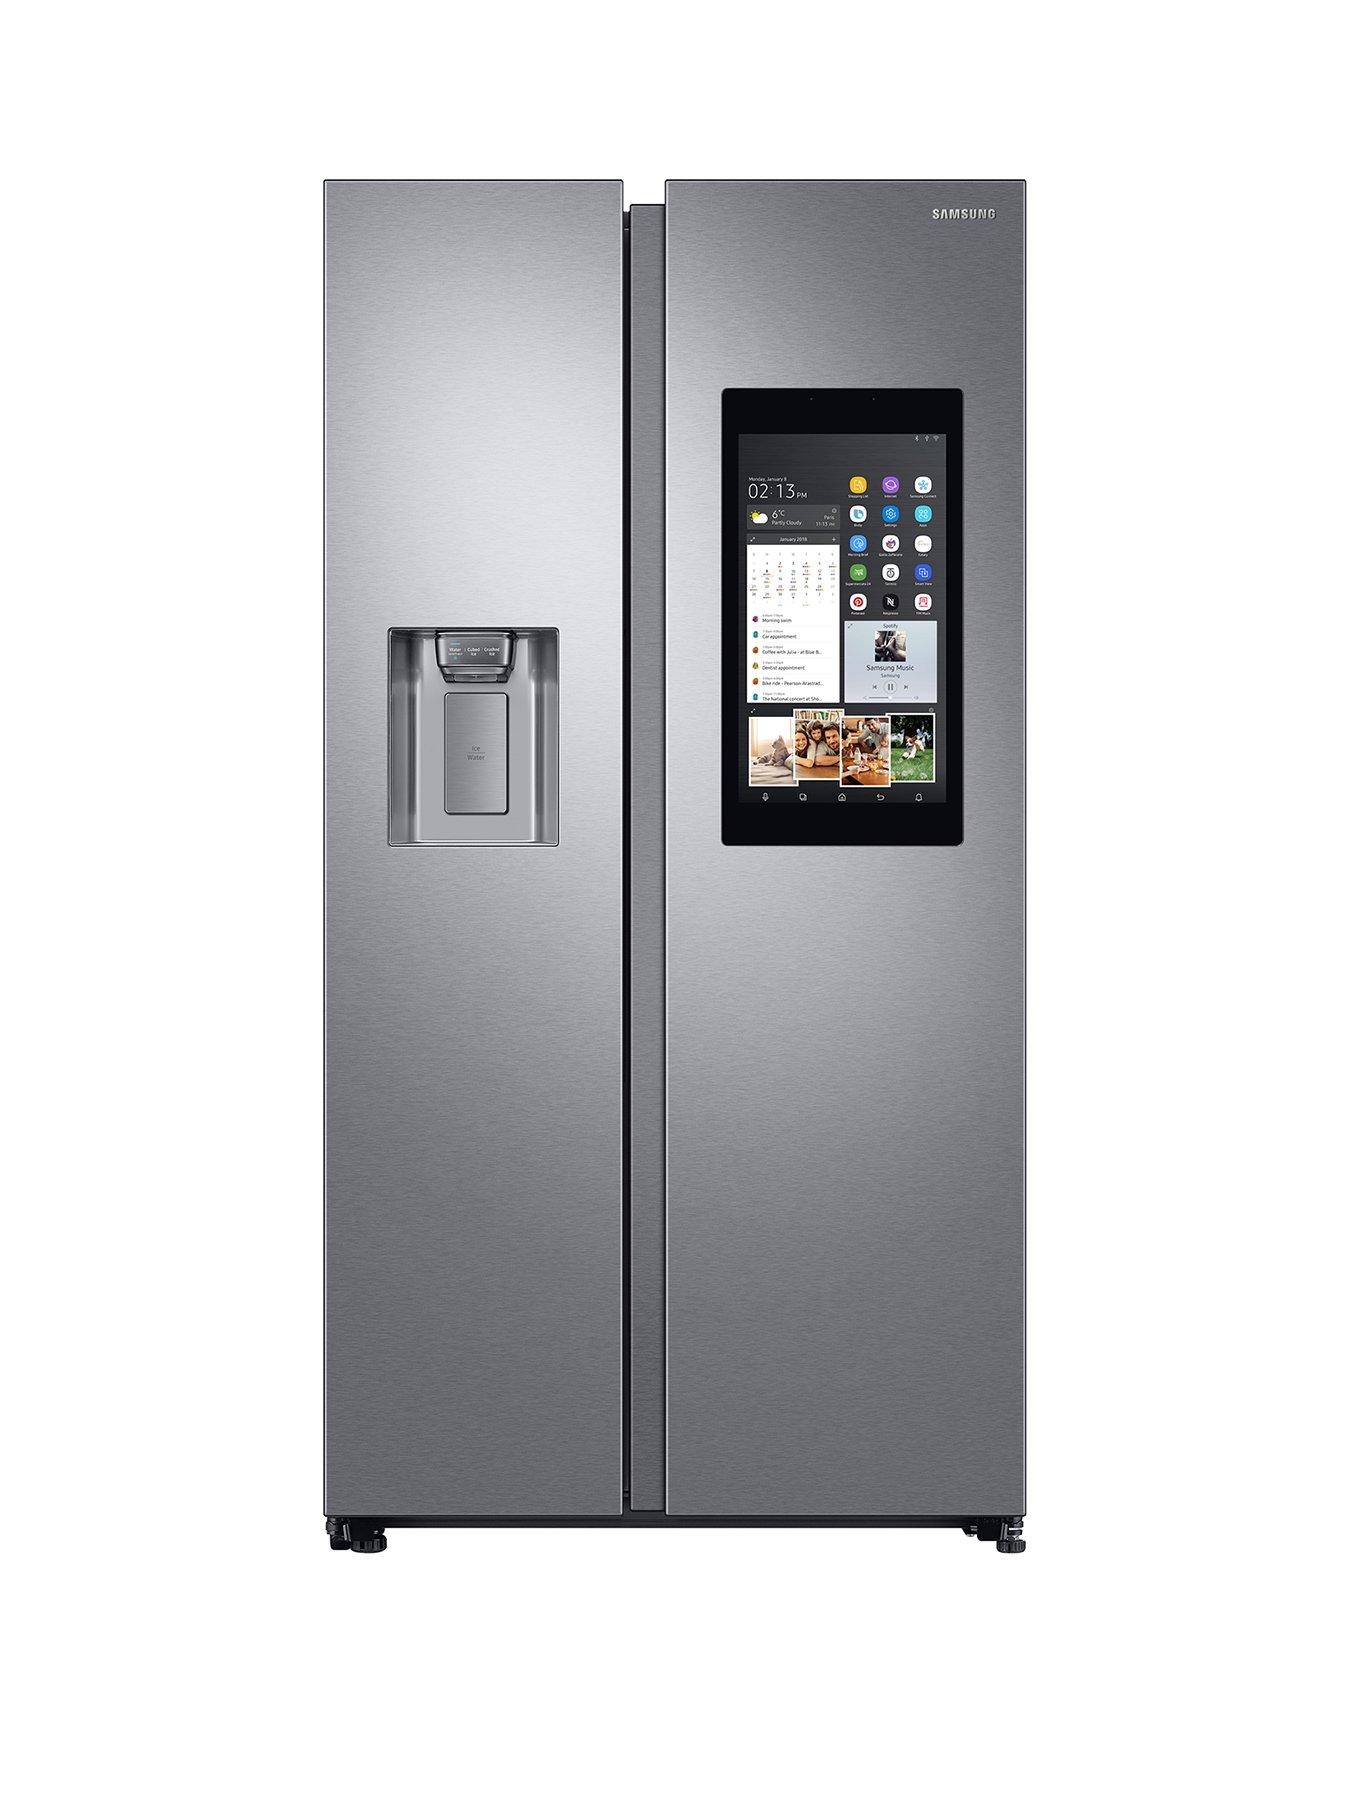 Samsung Rs68N8941Sl/Eu Family Hub Style Frost Free Fridge Freezer With Plumbed Ice, Water Dispenser And 5 Year Samsung Parts And Labour Warranty – Aluminium Finish